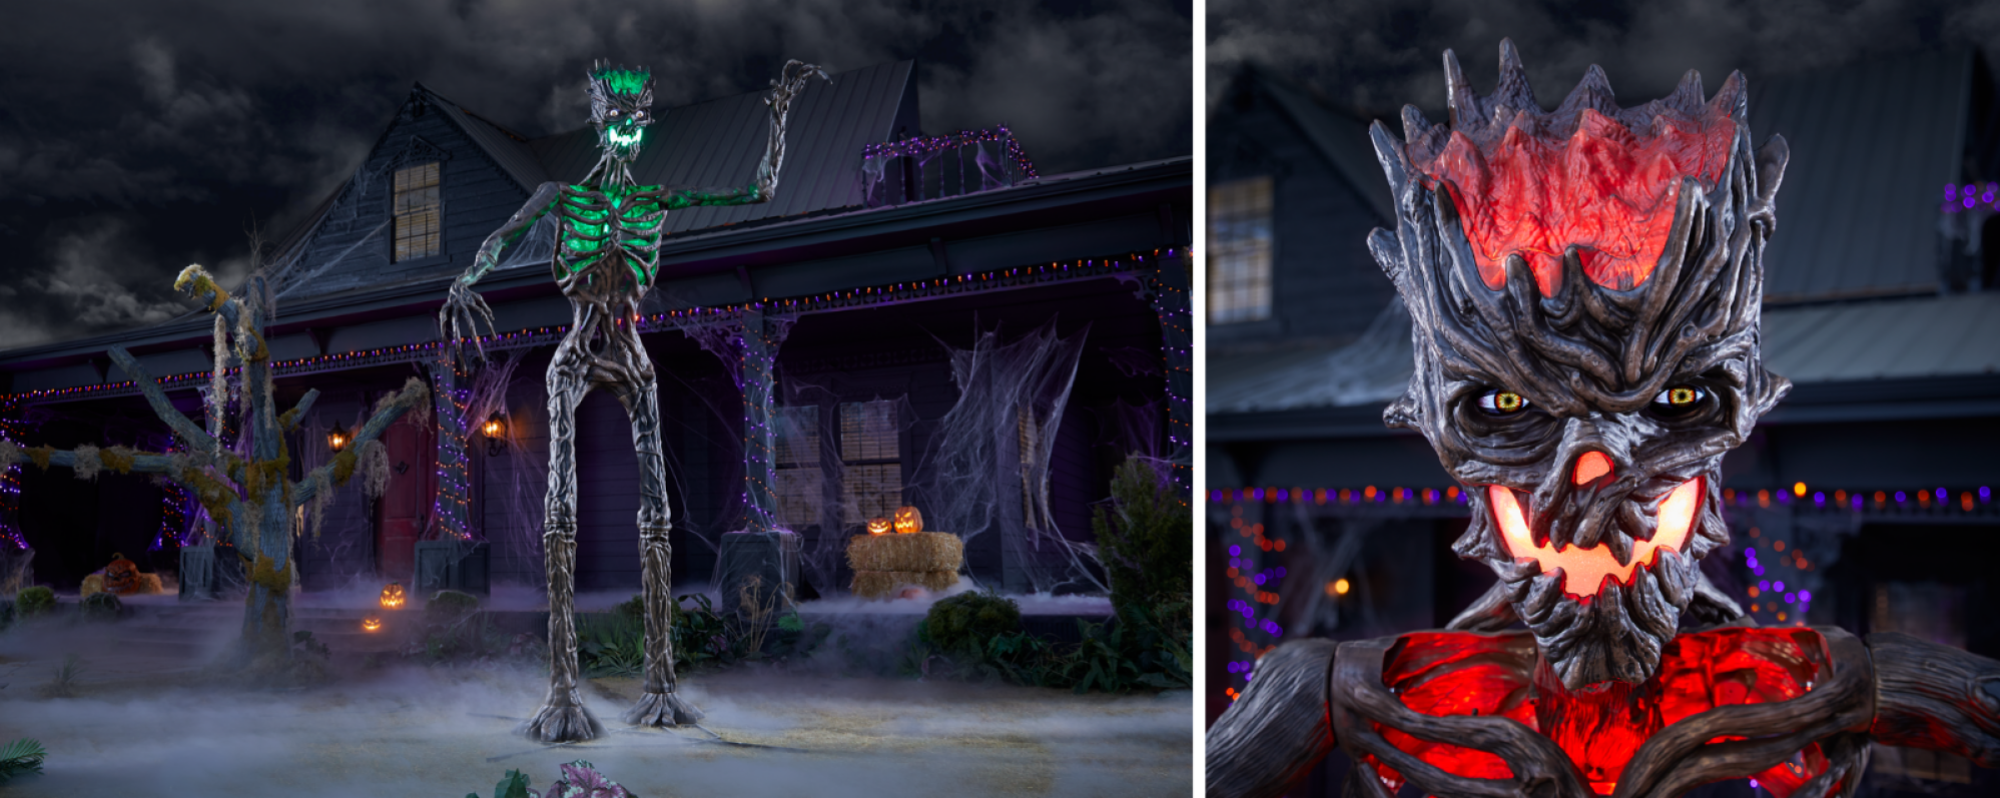 a full view of the 12.5 Ft. Giant-Sized Inferno Deadwood Skeleton in front of a haunted house next to a close-up of its head